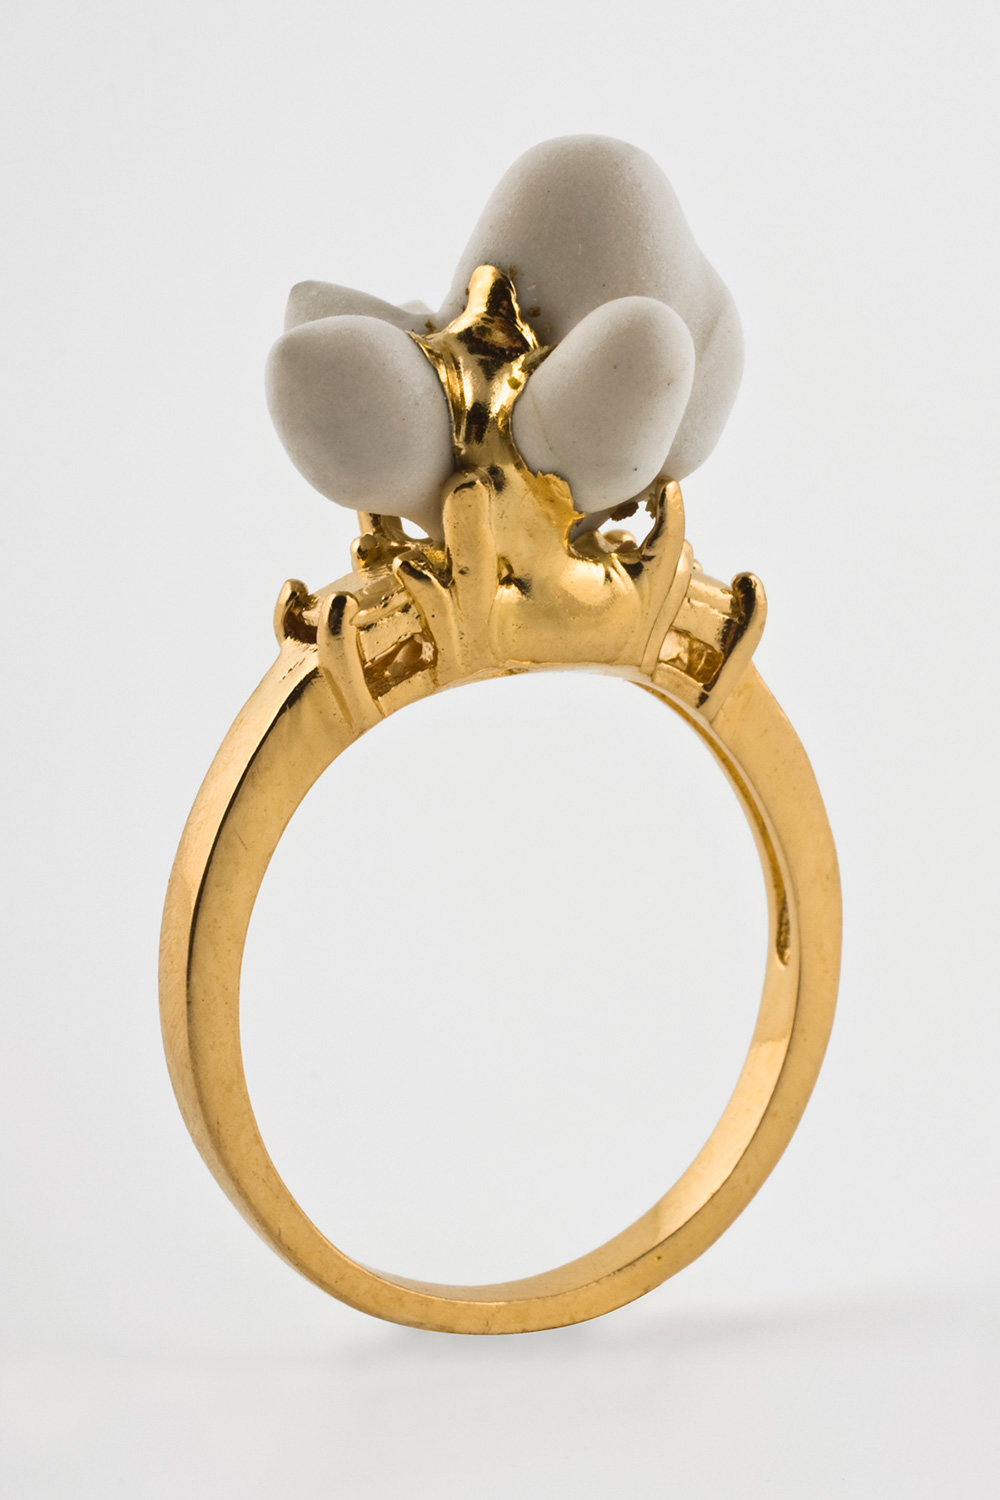 Gold-plated ring with an organic porcelain adornment